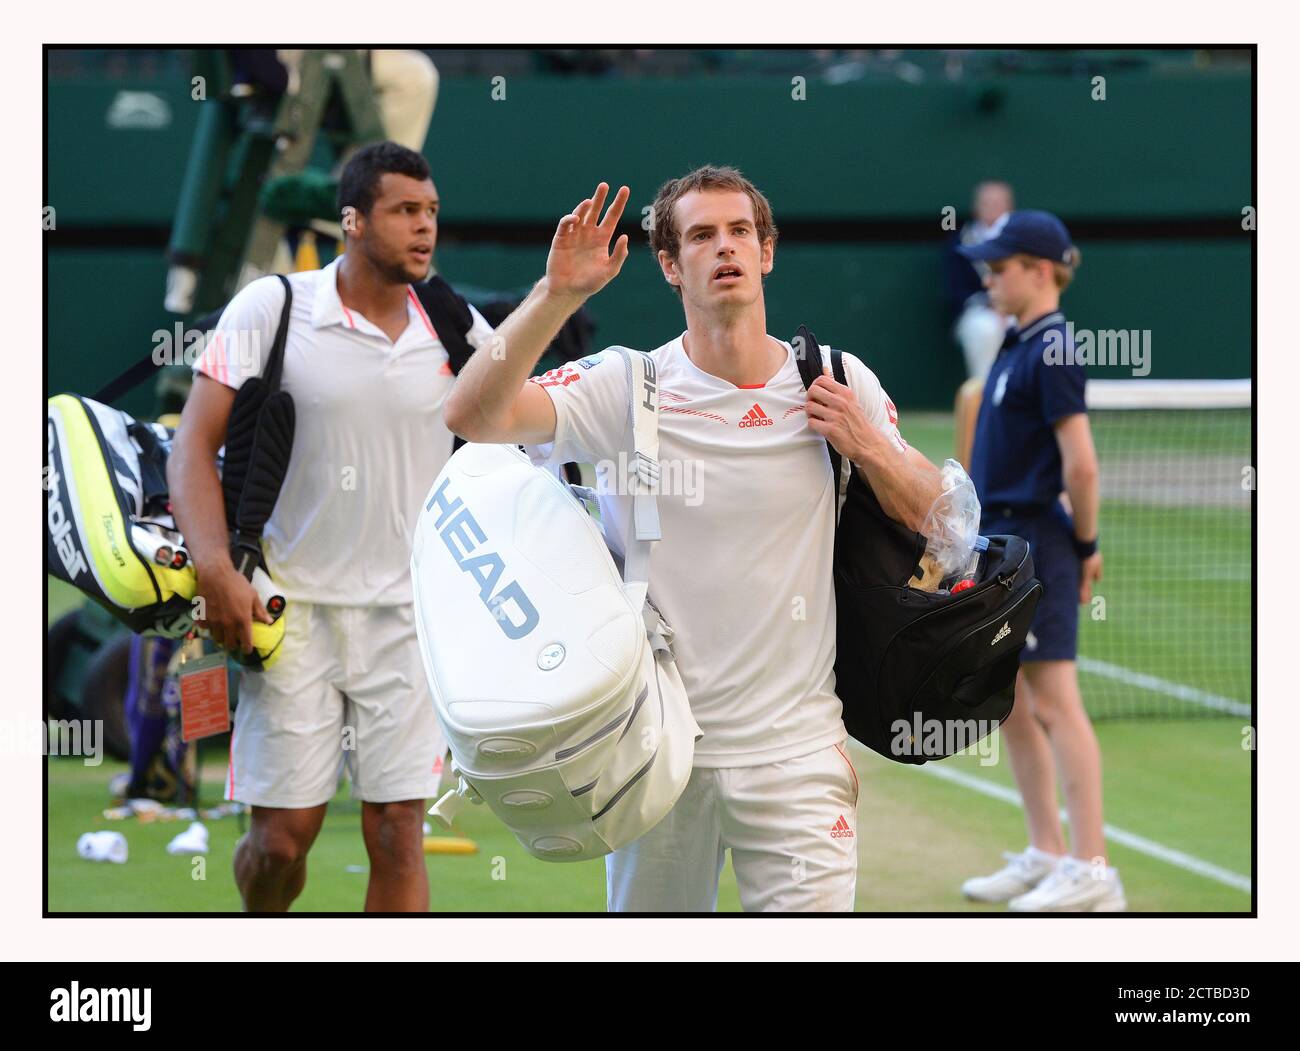 ANDY MURRAY LOOKS RELIEVED TO HAVE BEATEN JO-WILFRIED TSONGA IN THE MNS SEMI-FINAL. WIMBLEDON 2012. PICTURE : © MARK PAIN /ALAMY STOCK PHOTO Stock Photo